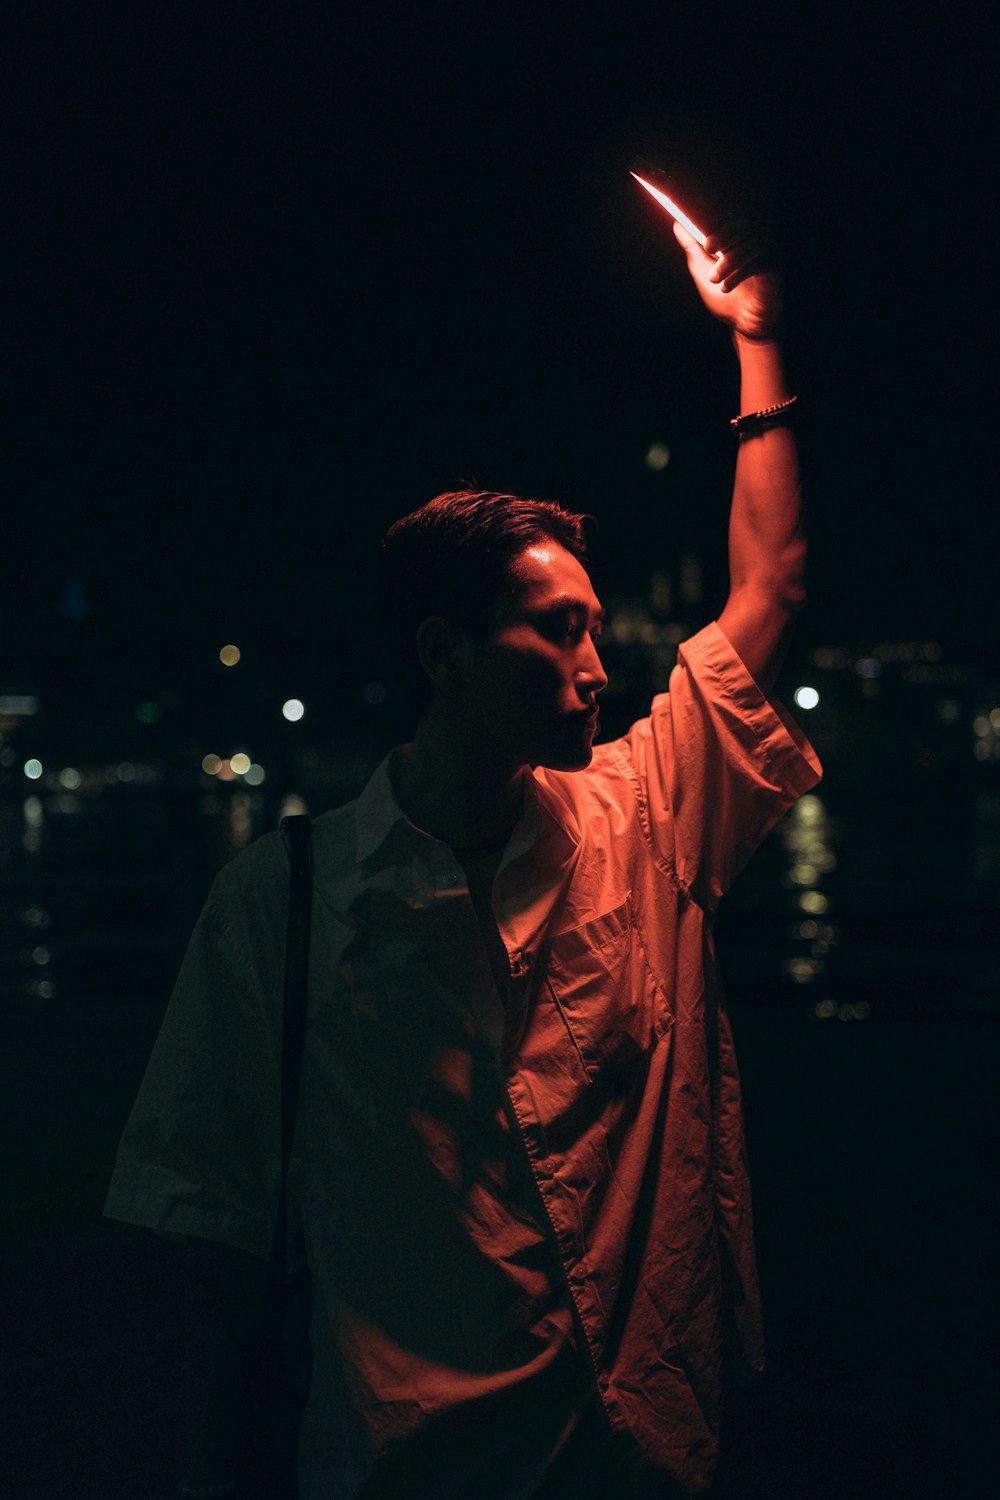 a man holding up a lit object in the dark